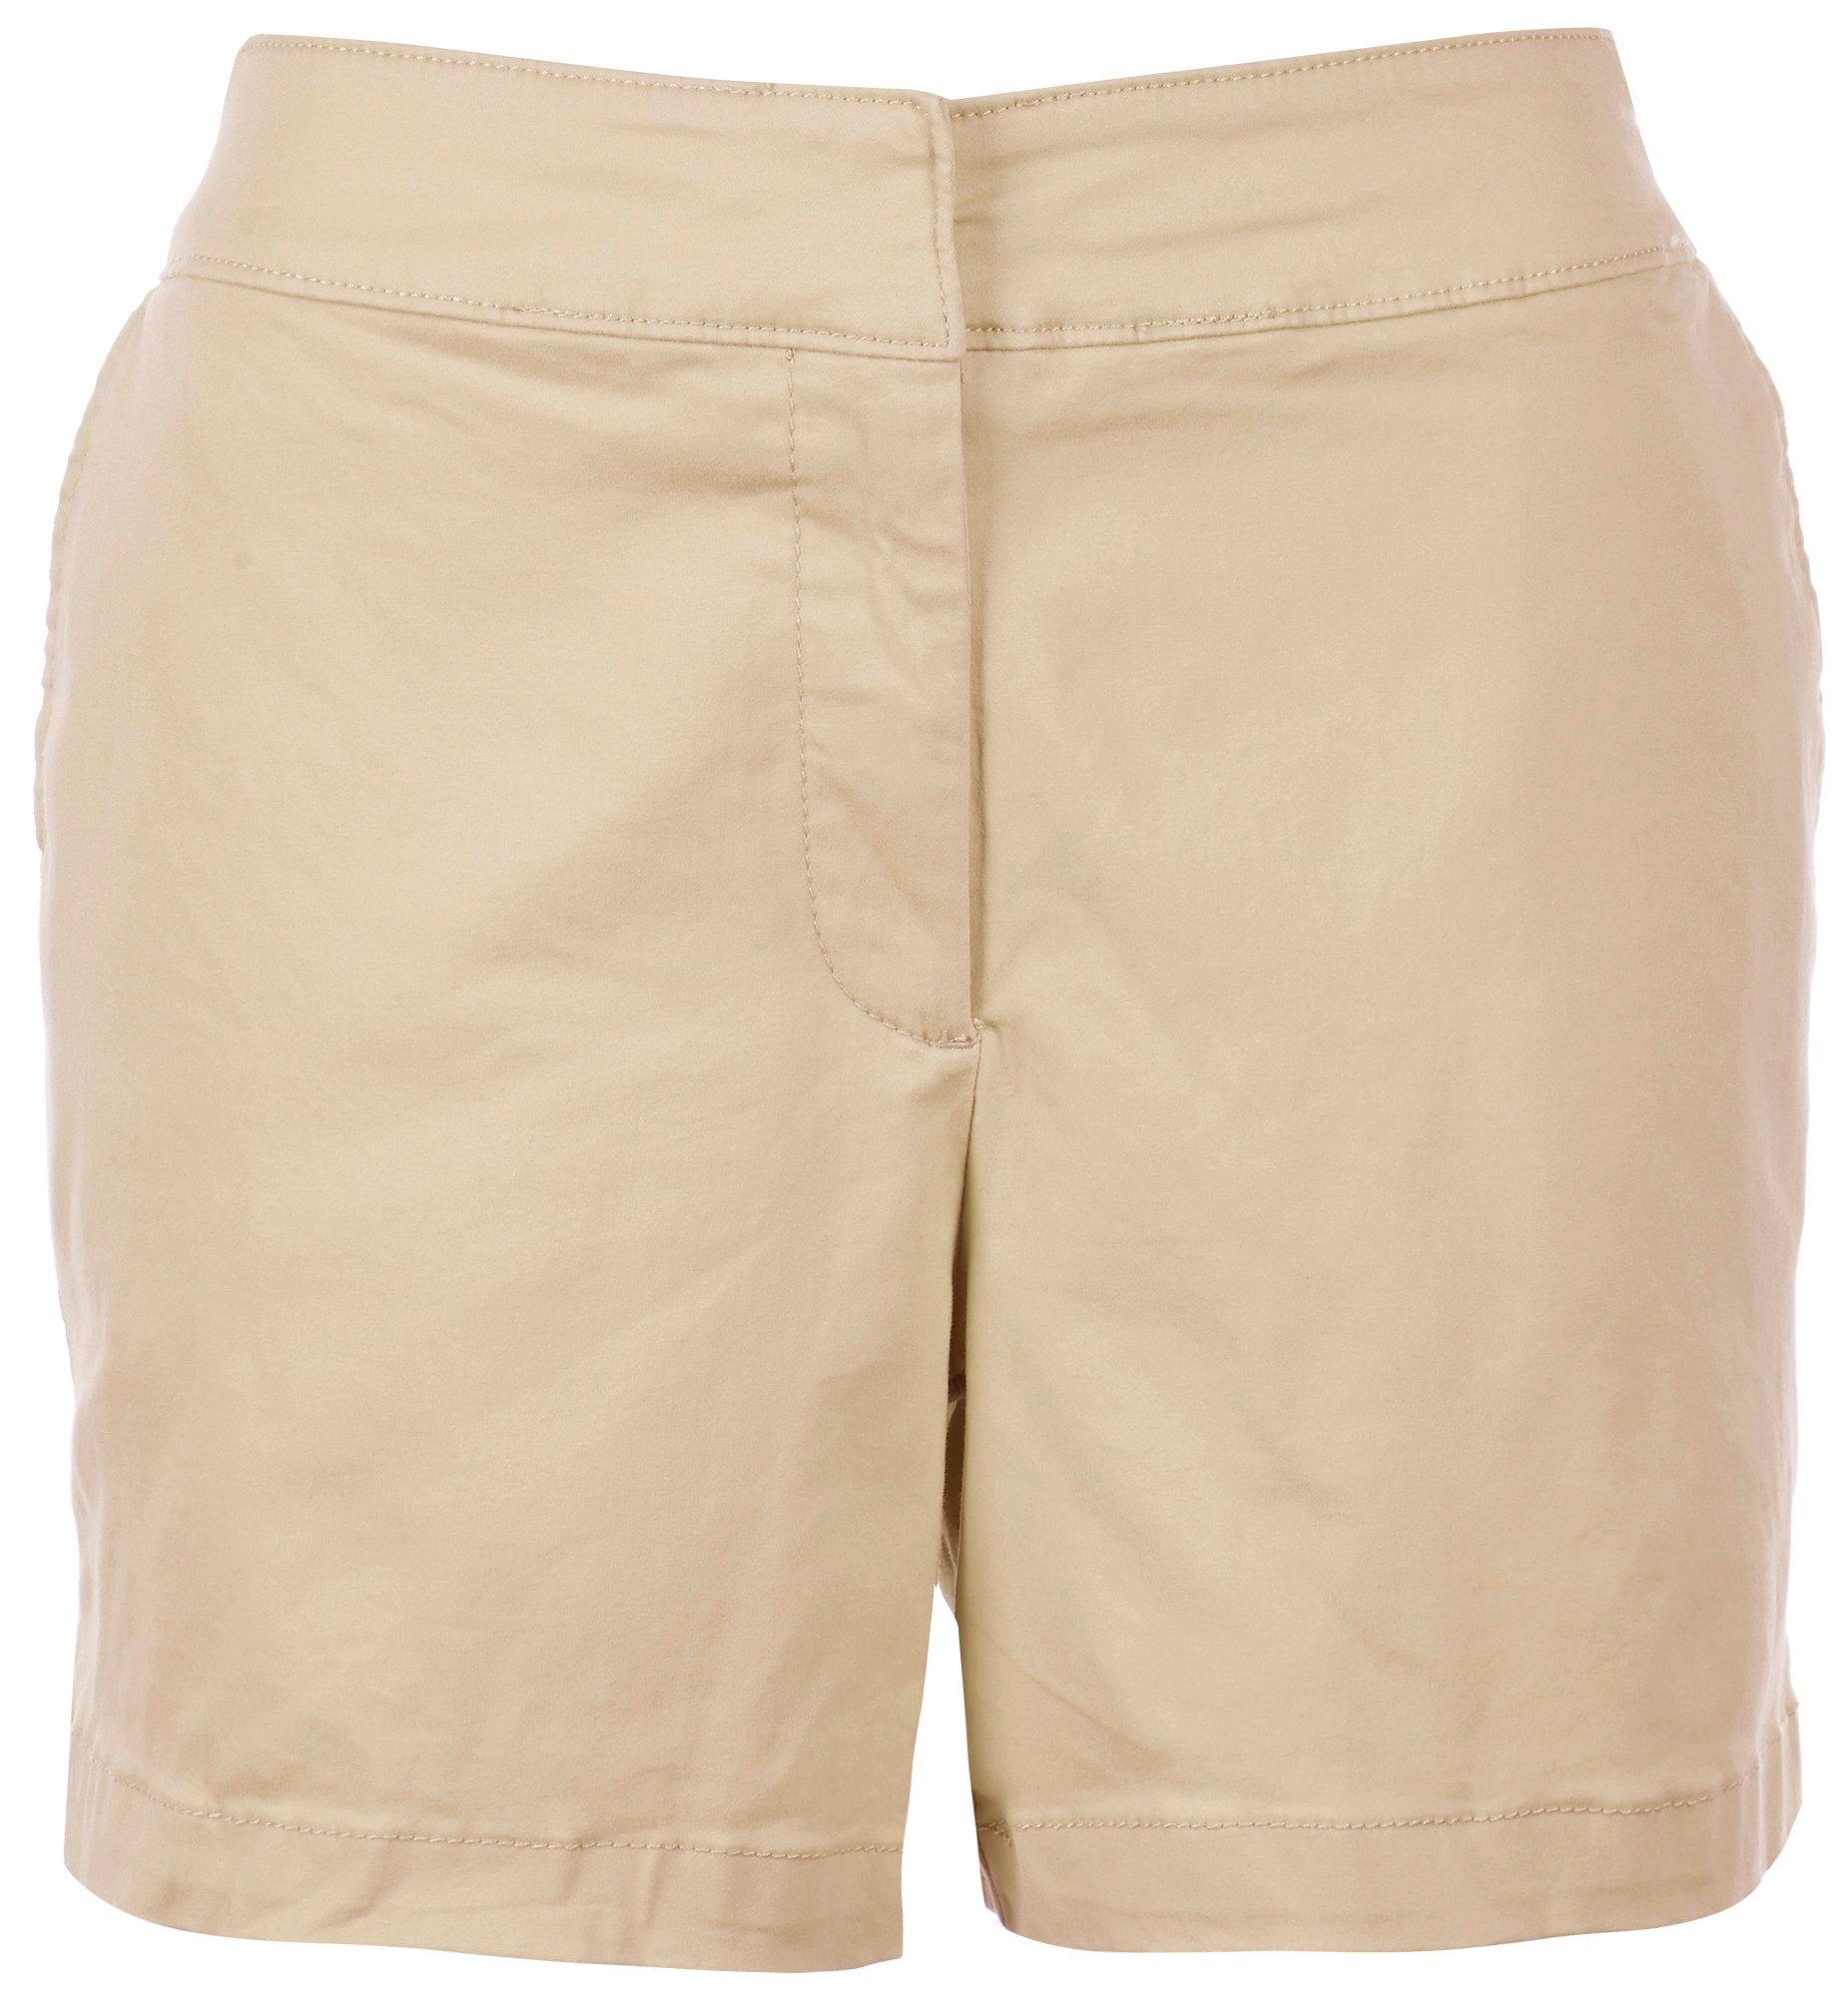 Womens 5 in. Everyday Shorts